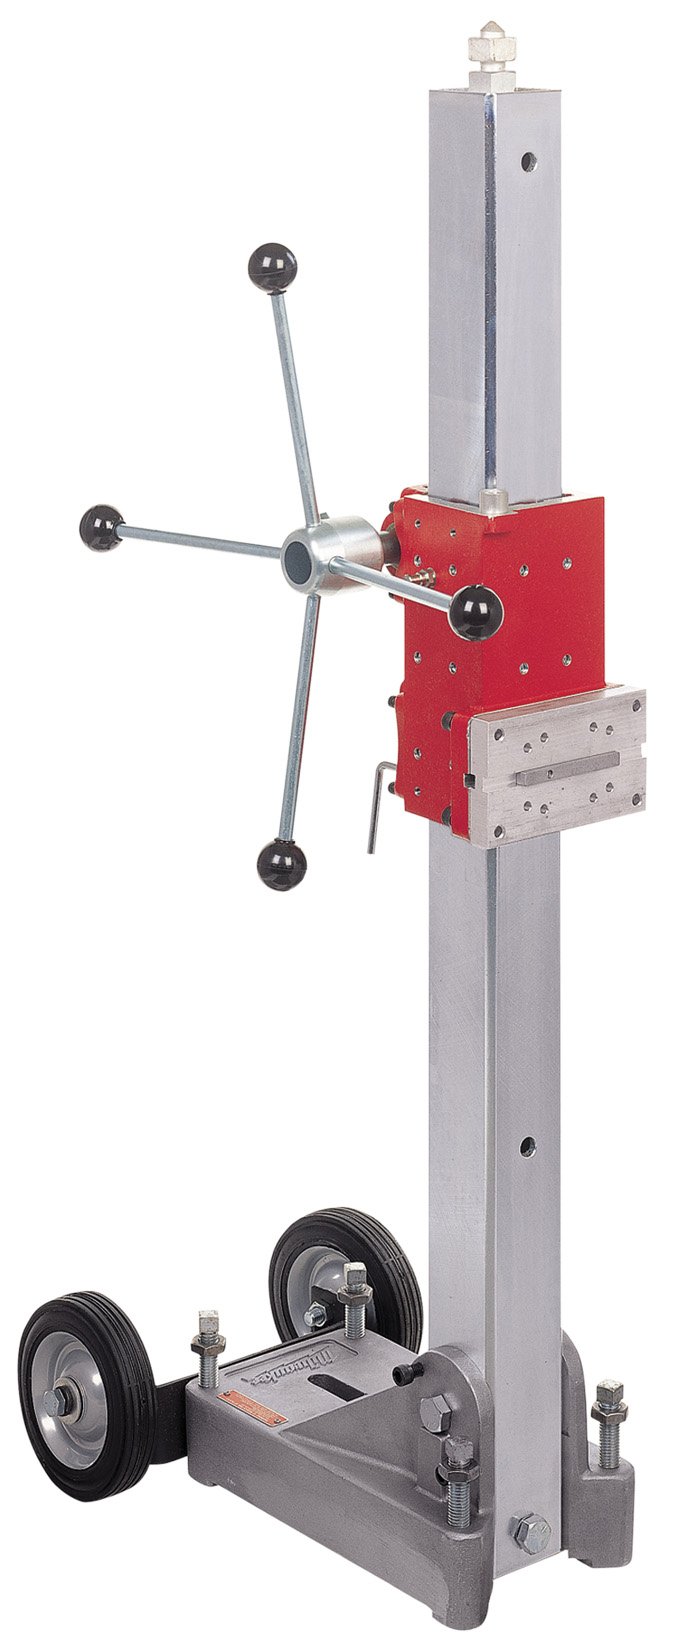 4125 045242009558 The Milwaukee model 4125 Dymo-Rig stand designed for the heavy duty hole driller. Larger column and base assembly ensure strength and durability for many years service. The small base is nice in confined drilling areas. Dymo-Rig stands feature large wheels for ease of movement. You can bolt it to the wall or the floor, or use the optional vac-pad for added versatility.